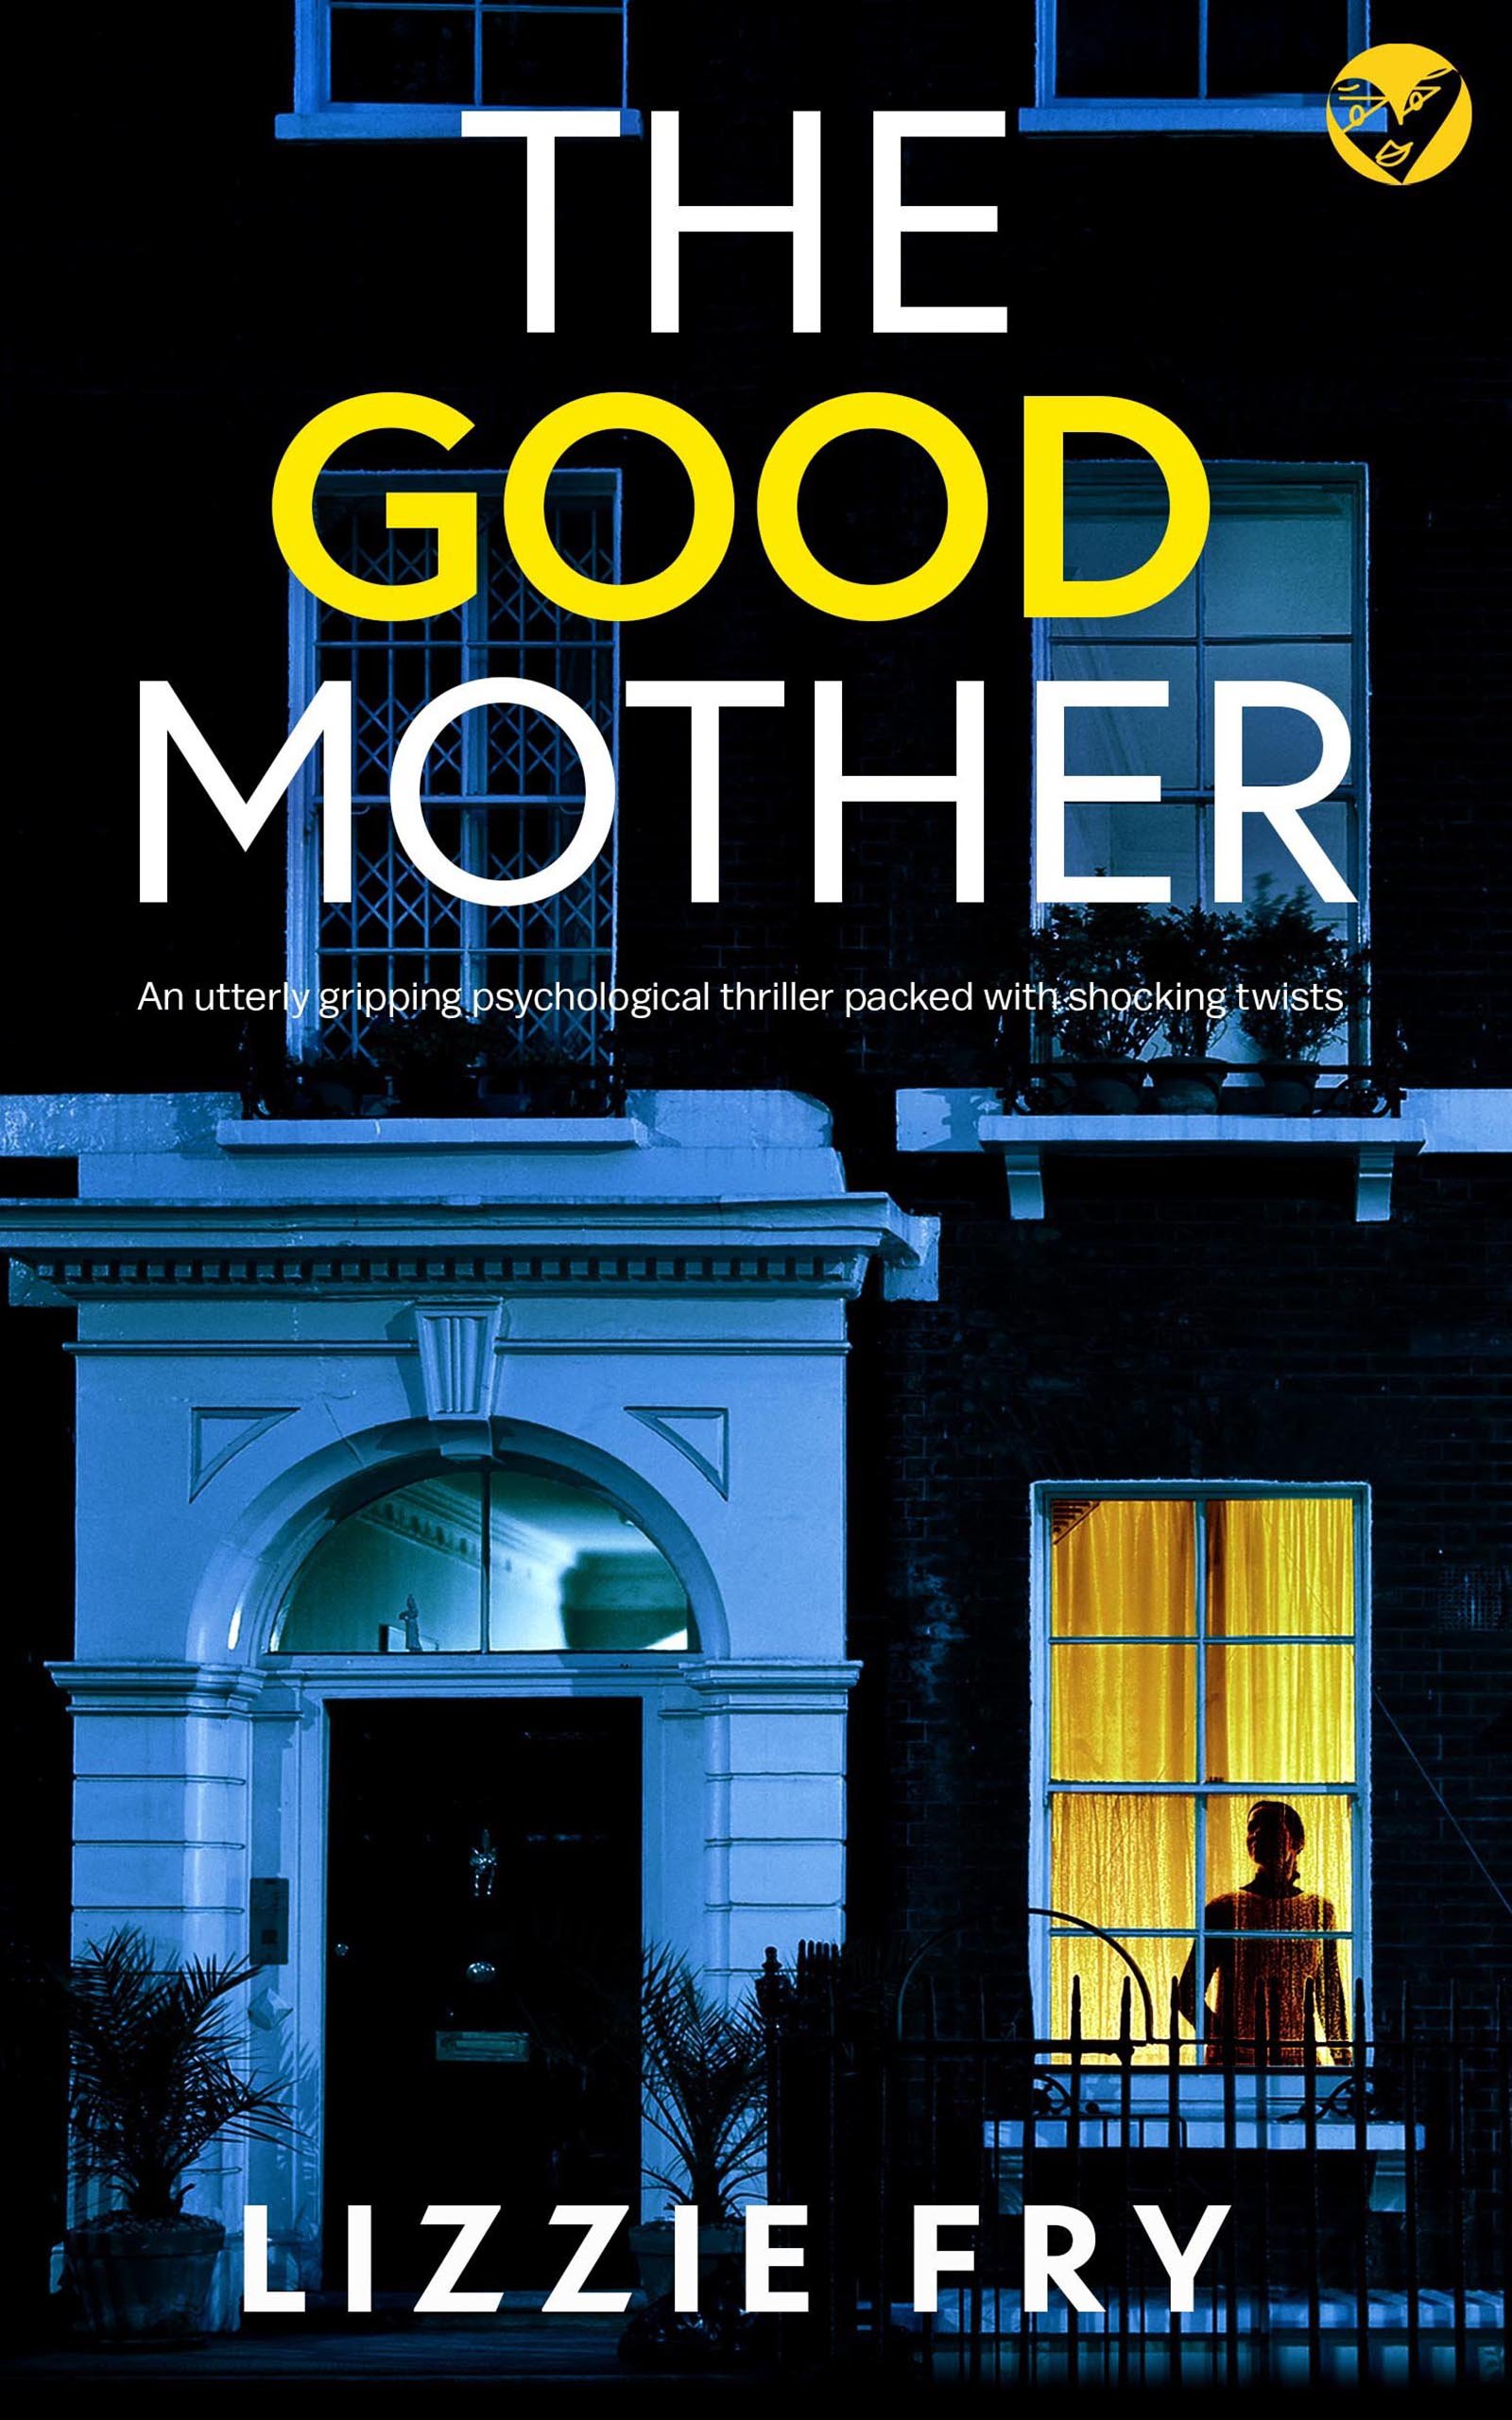 THE GOOD MOTHER Cover publish 631KB (1).jpg